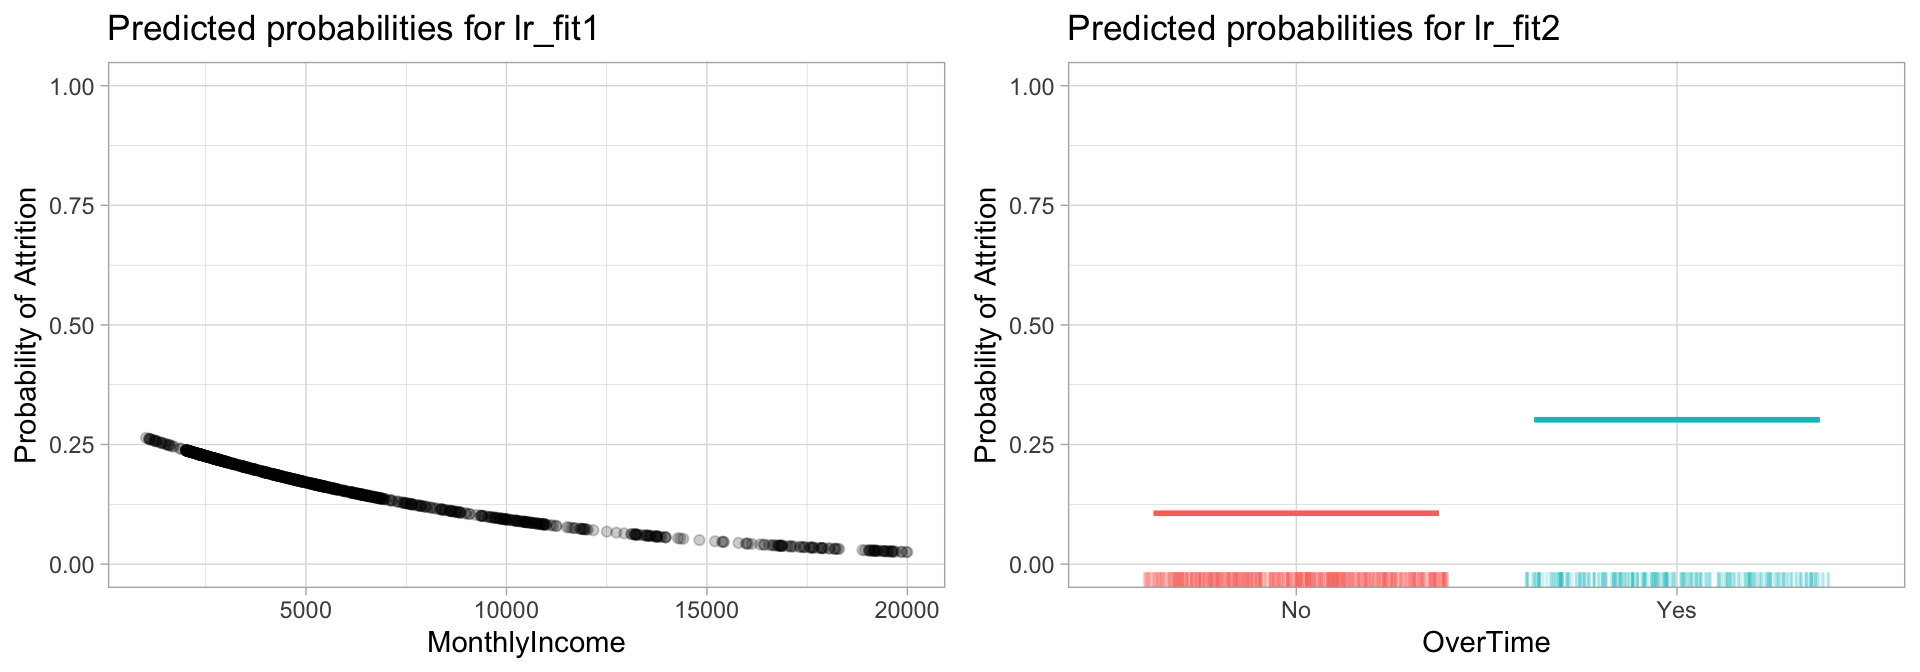 Predicted probablilities of employee attrition based on monthly income (left) and overtime (right). As monthly income increases, `lr_fit1` predicts a decreased probability of attrition and if employees work overtime `lr_fit2` predicts an increased probability.